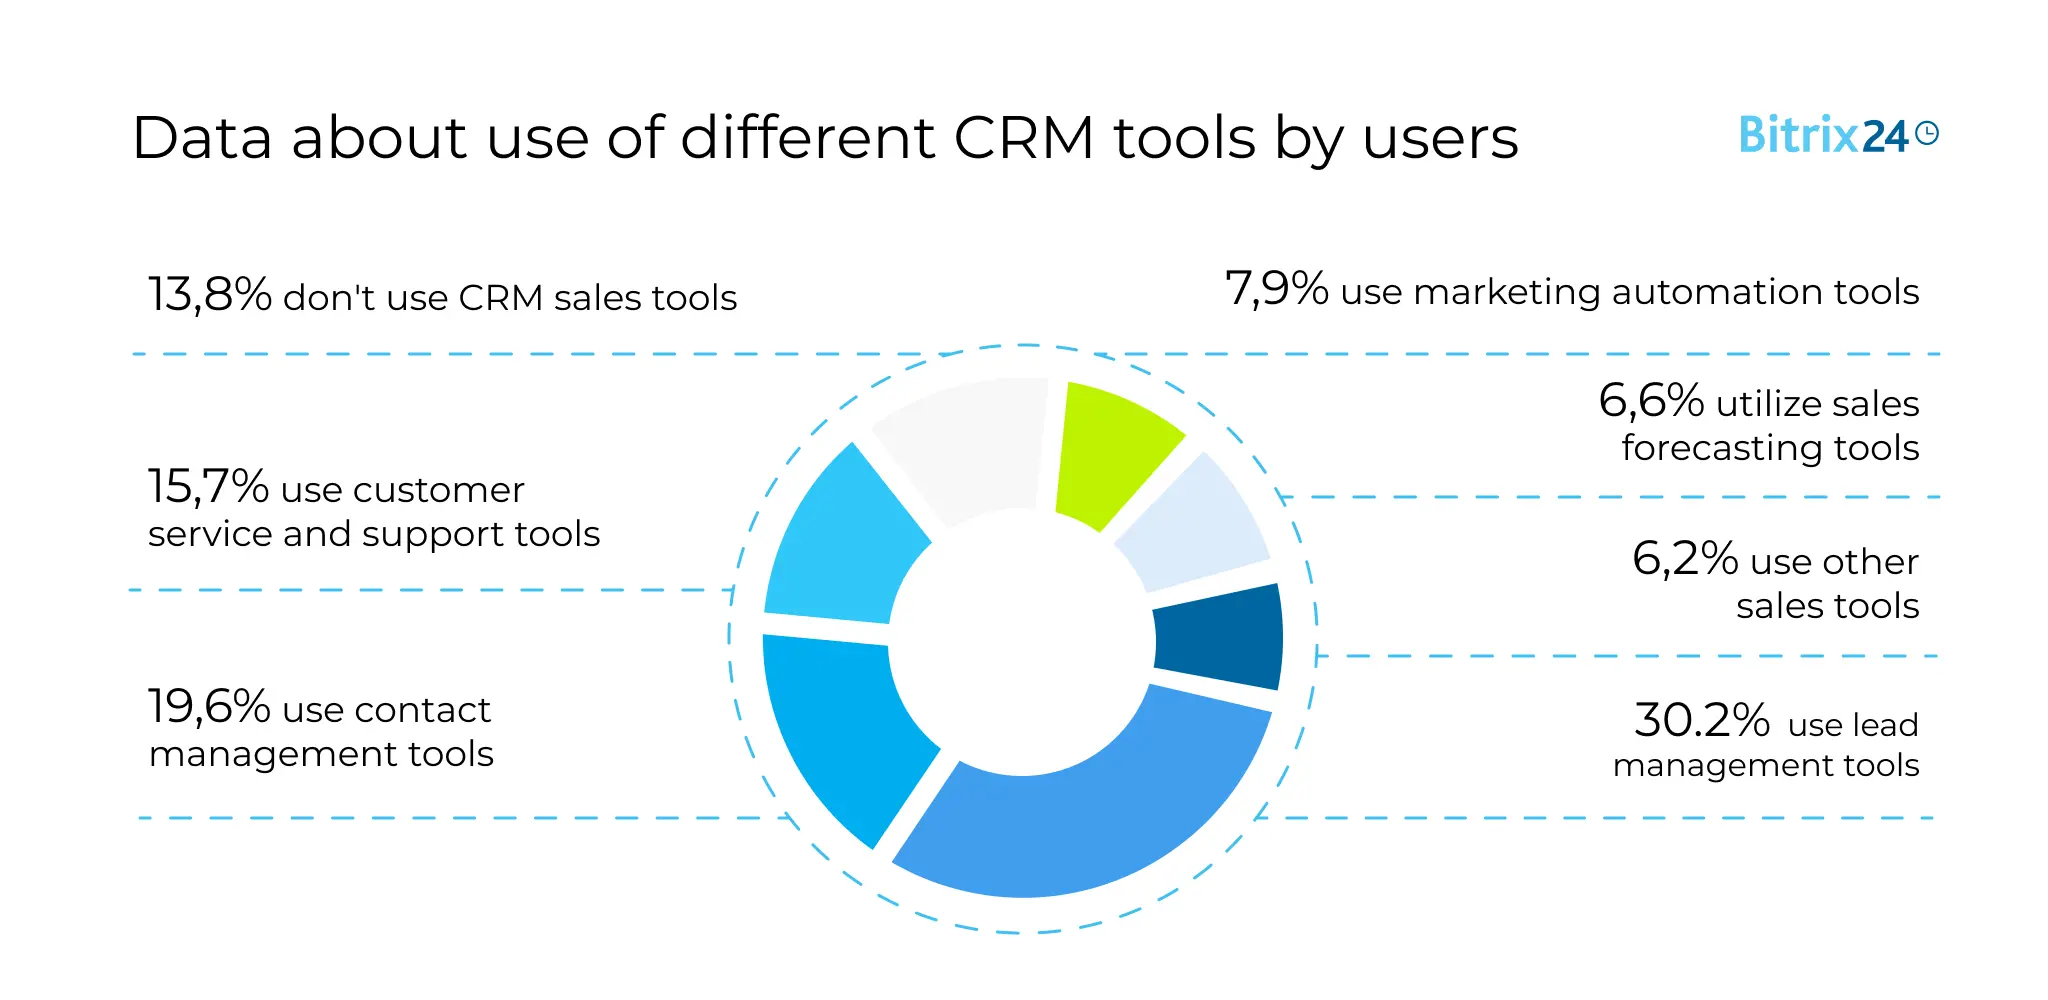  Data about use of different CRM tools by users